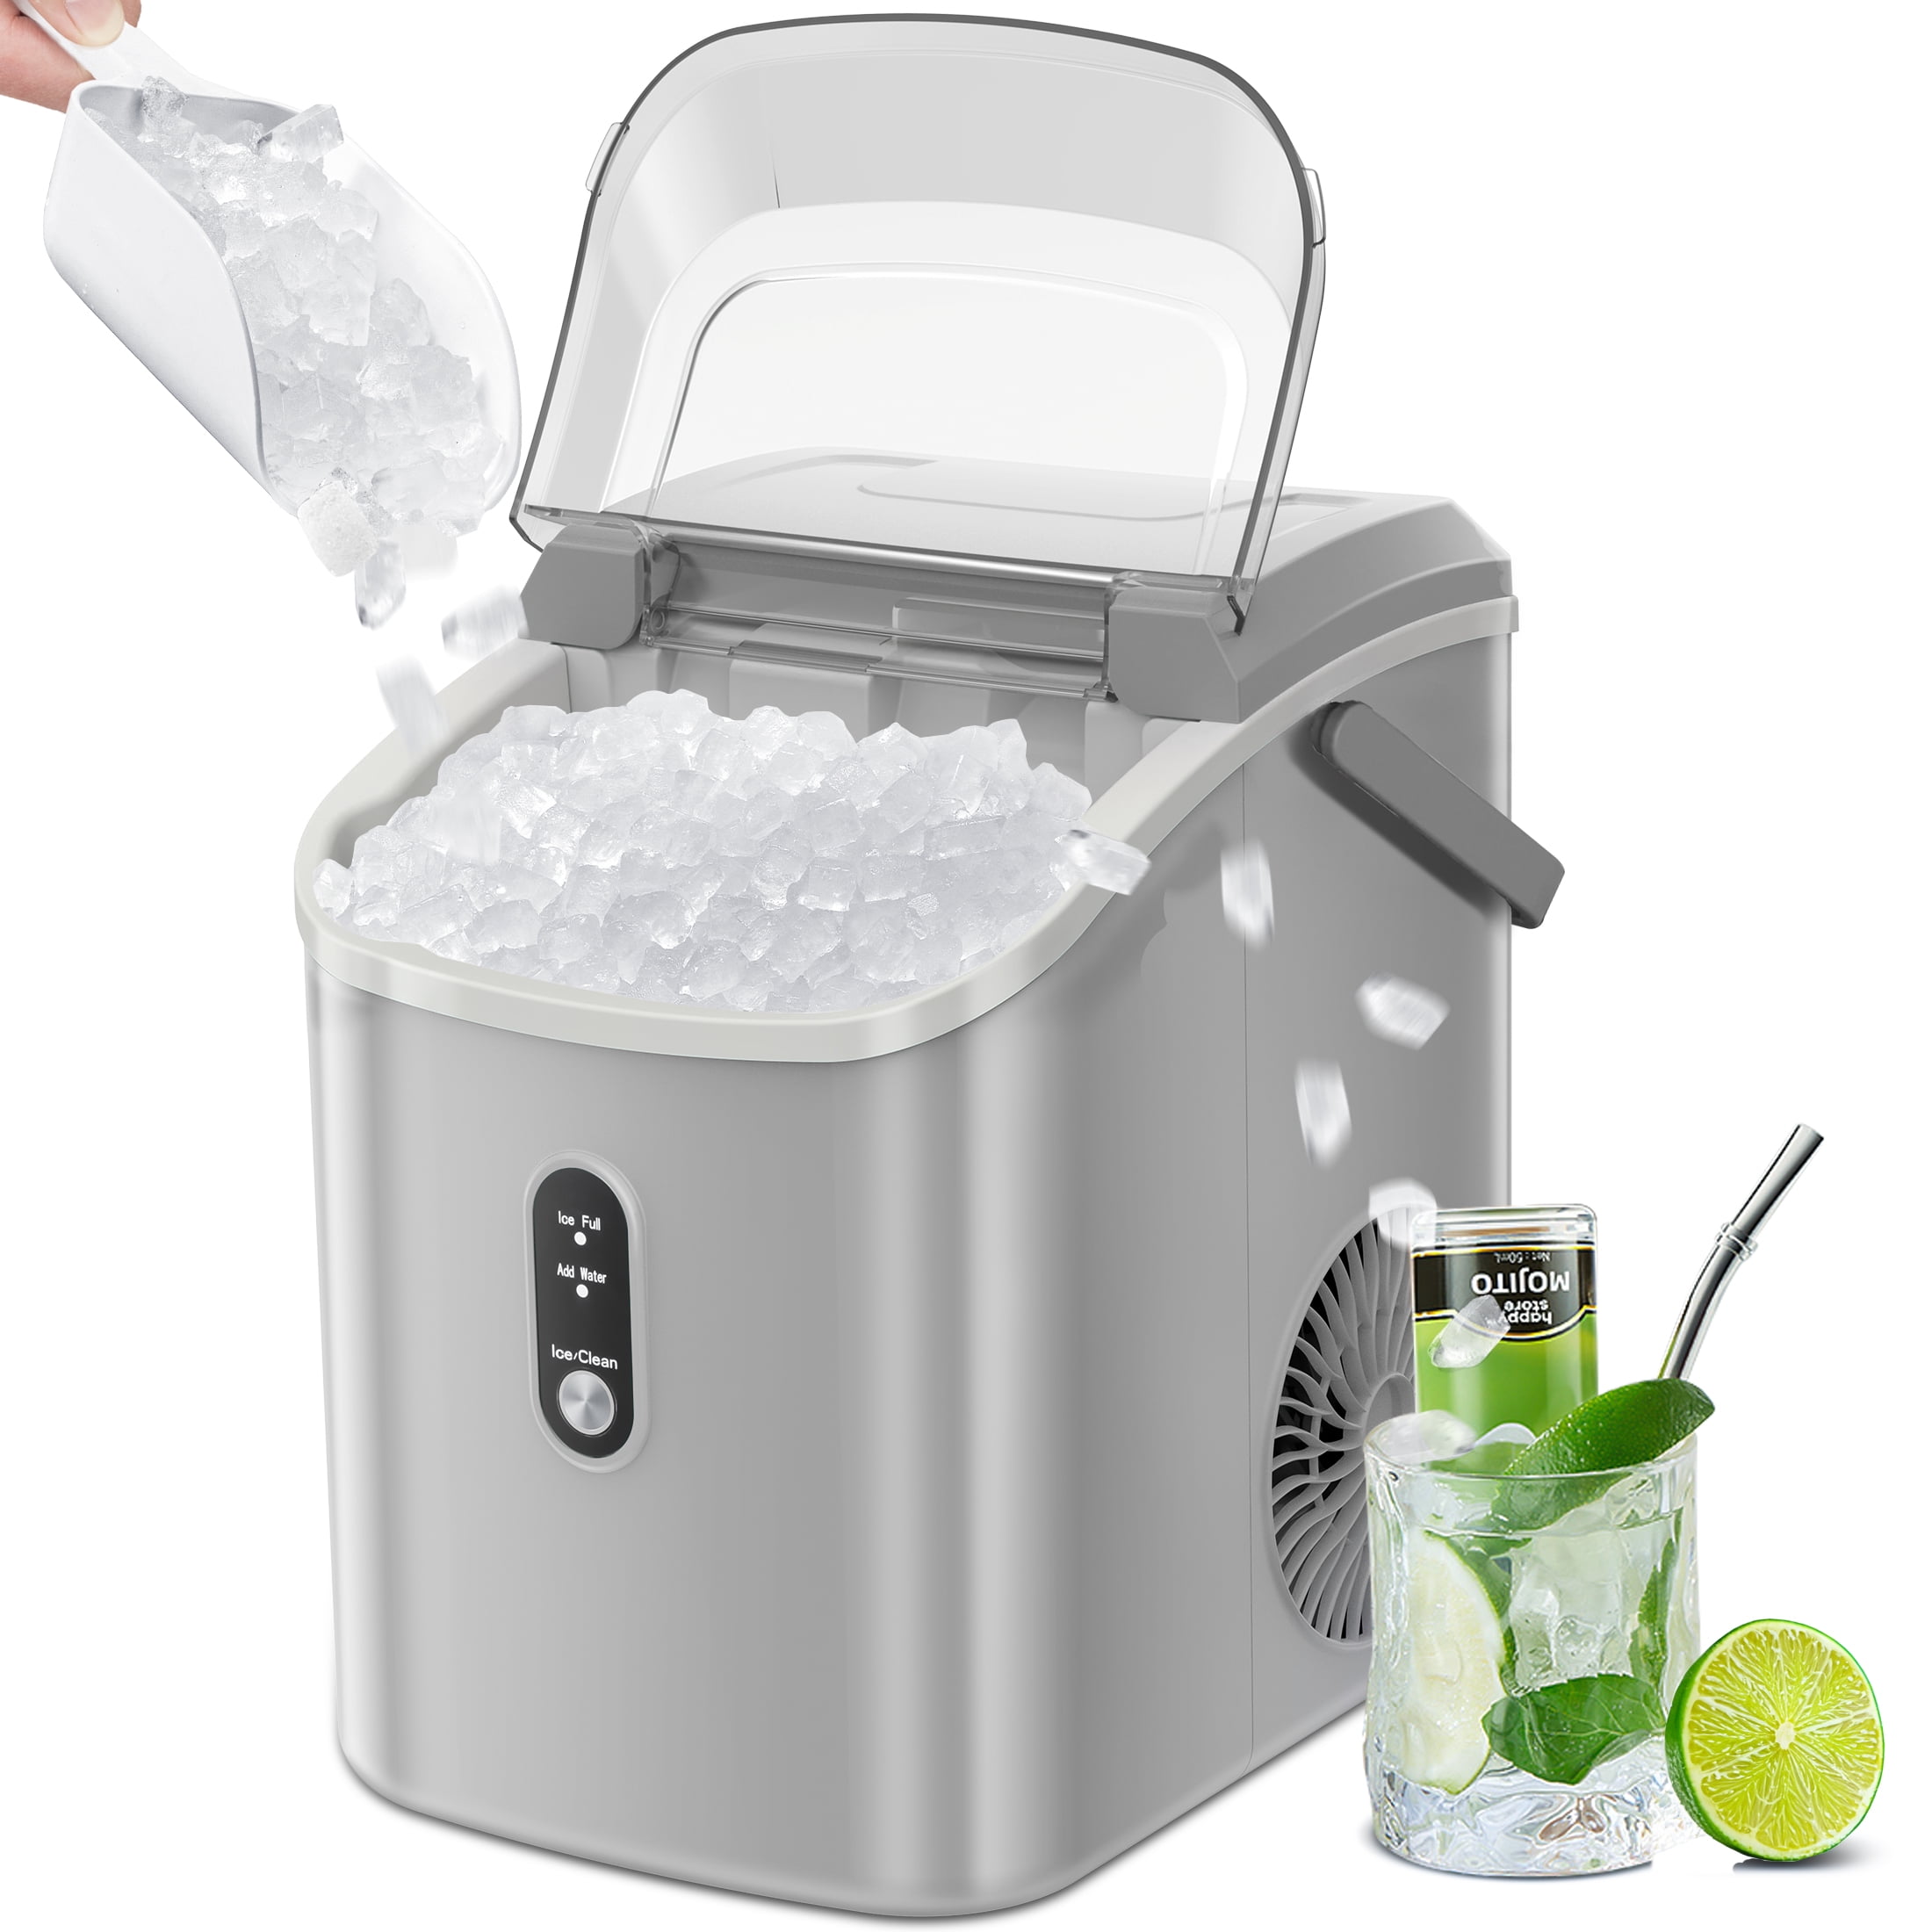  Kismile Nugget Ice Makers Countertop,Portable Ice Maker Machine  with Crushed Ice, 35lbs/Day,One-Click Operation,Self-Cleaning Countertop  ice machine,Pellet Ice Maker Countertop for Home/Kitchen/Office : Appliances